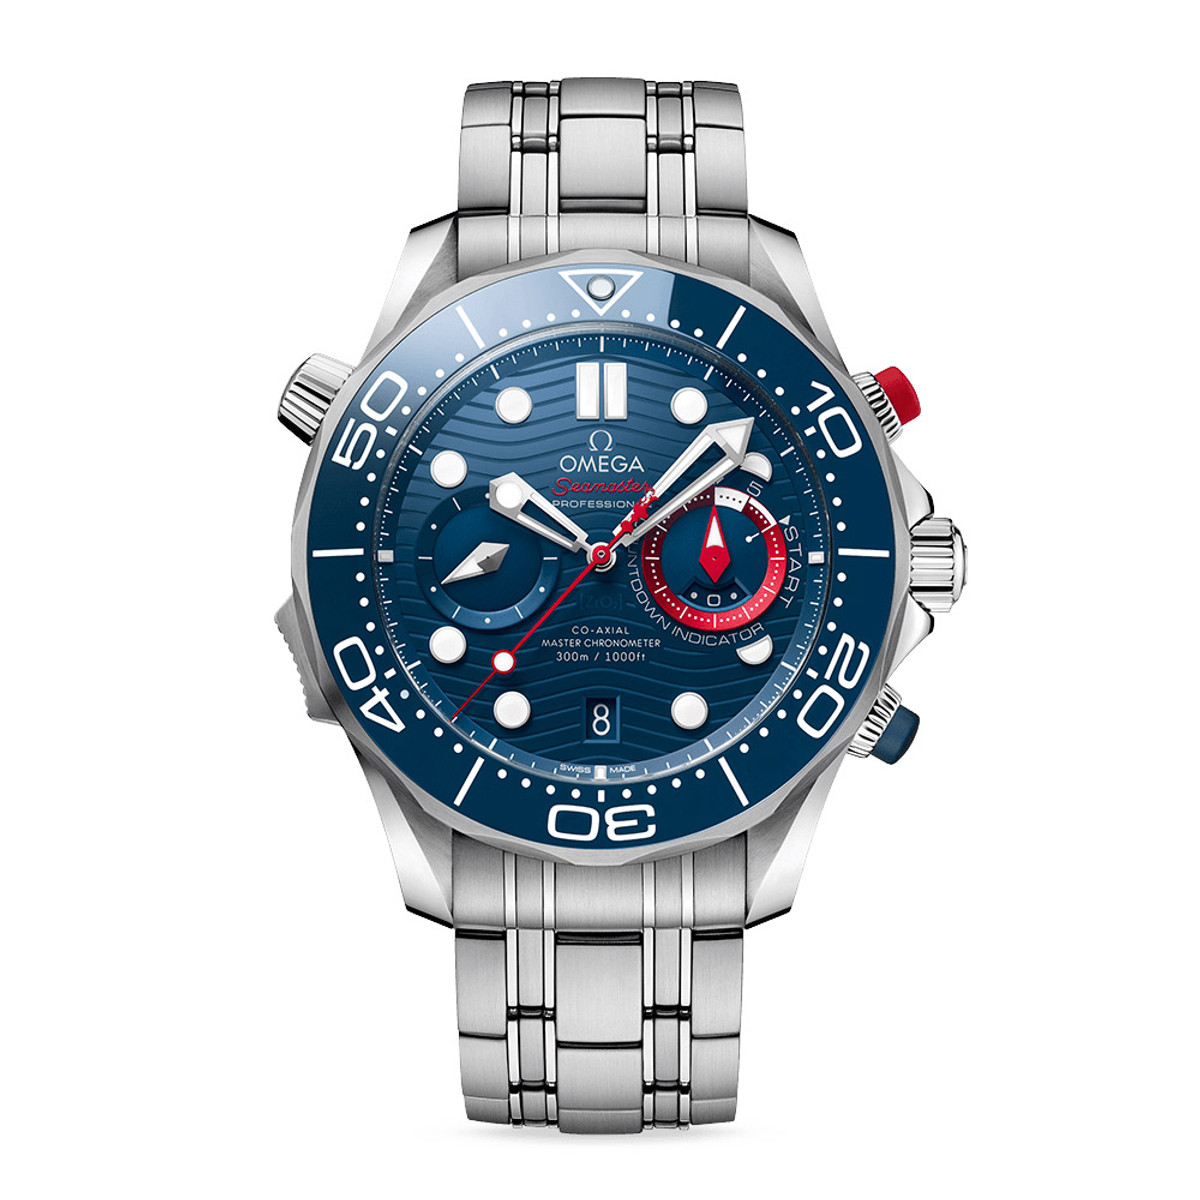 Omega Seamaster Diver 300M Chronograph America's Cup 44mm 210.30.44.51.03.002-30066 Product Image